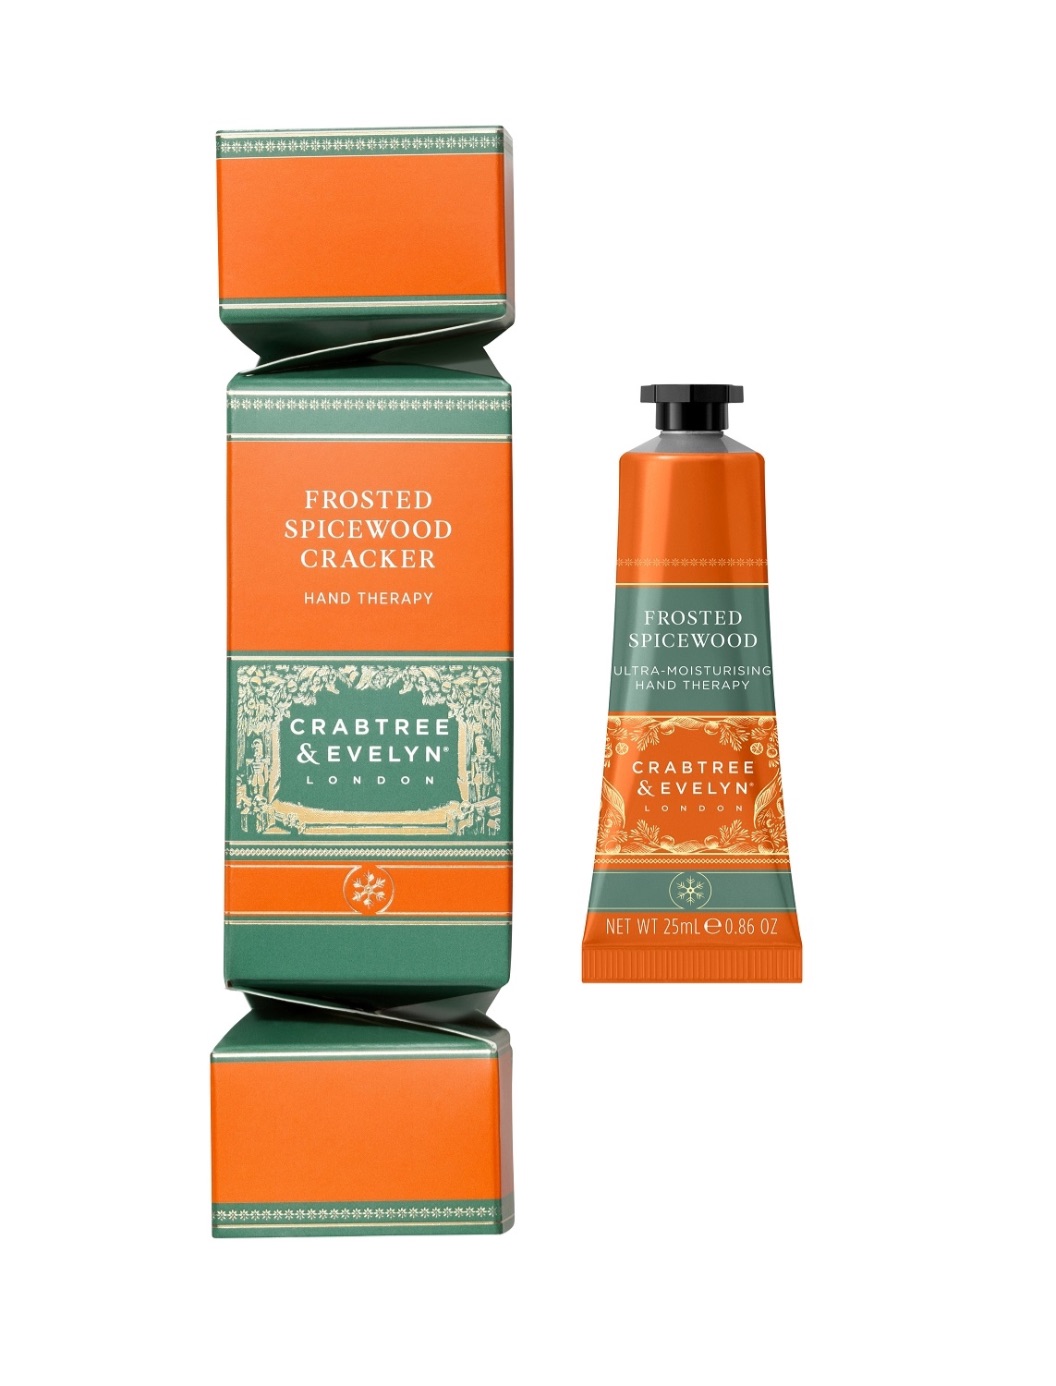 Crabtree & Evelyn Frosted Spicewood Hand Therapy Cracker 25g